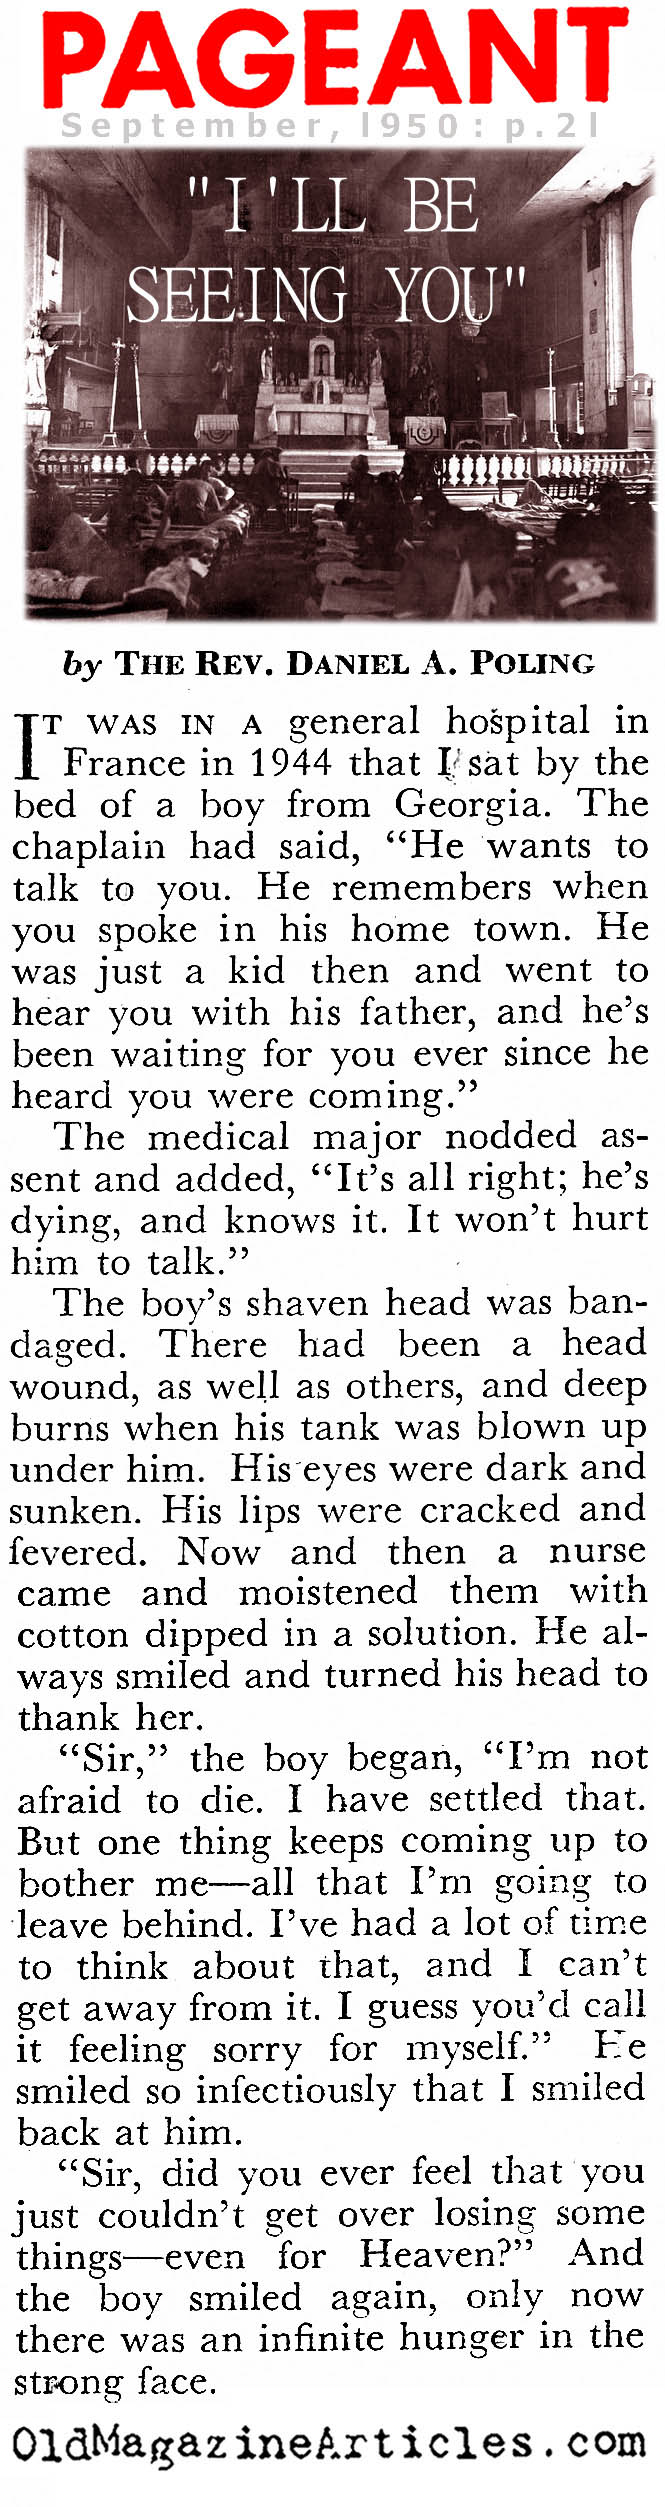 The Dying Soldier (Pageant Magazine, 1950)